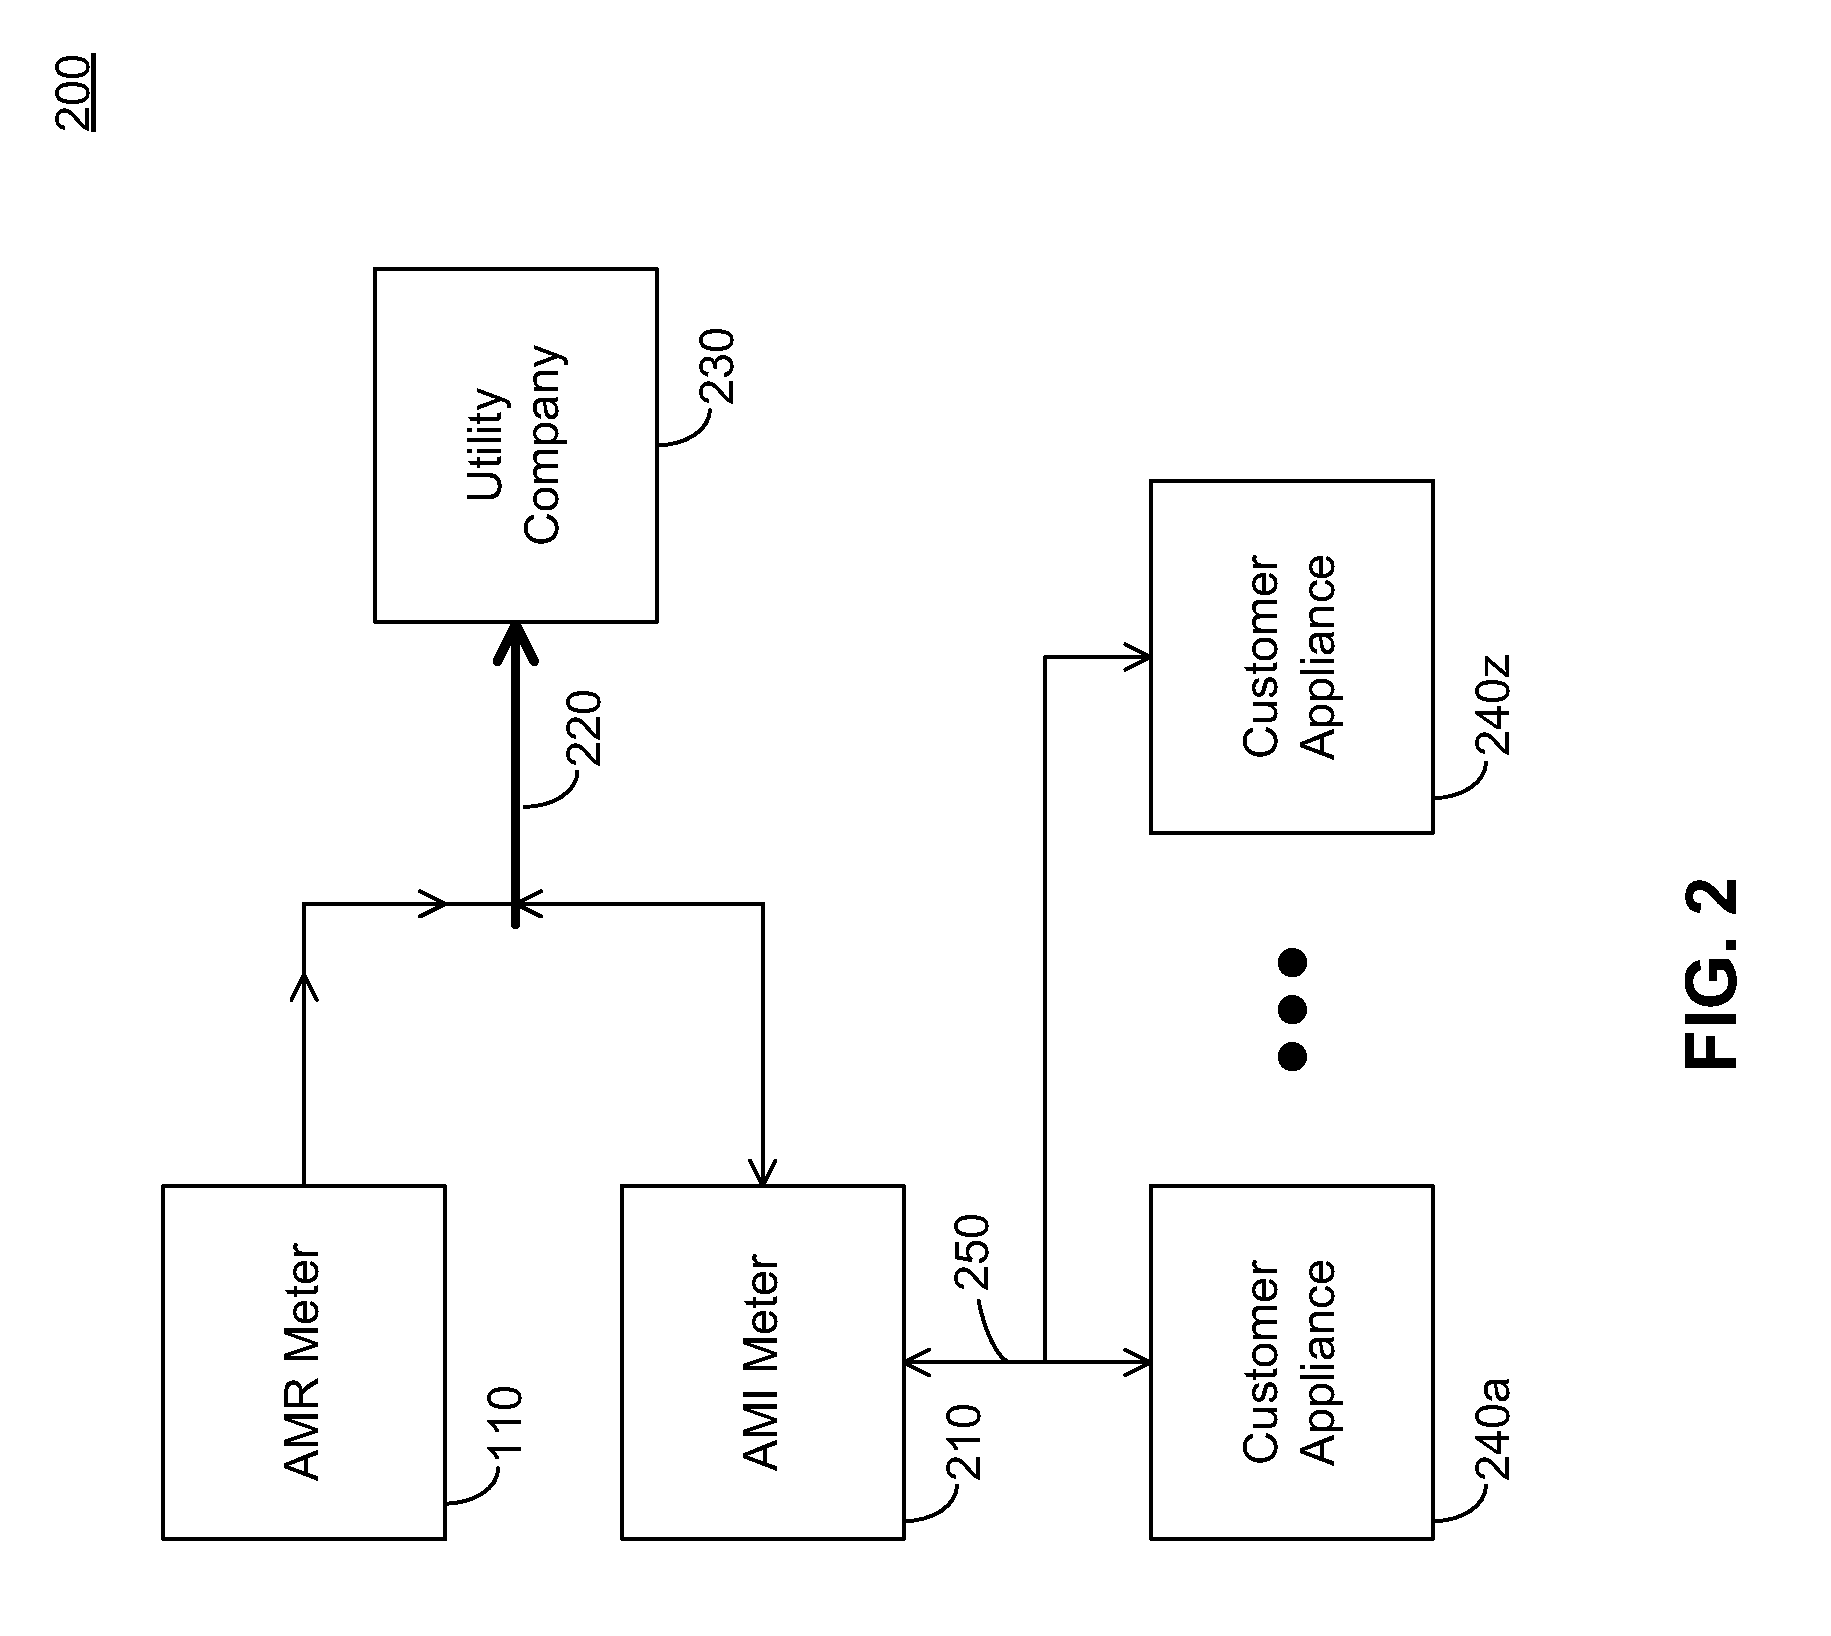 System, Method and Apparatus for Advanced Utility Control, Monitoring and Conservation